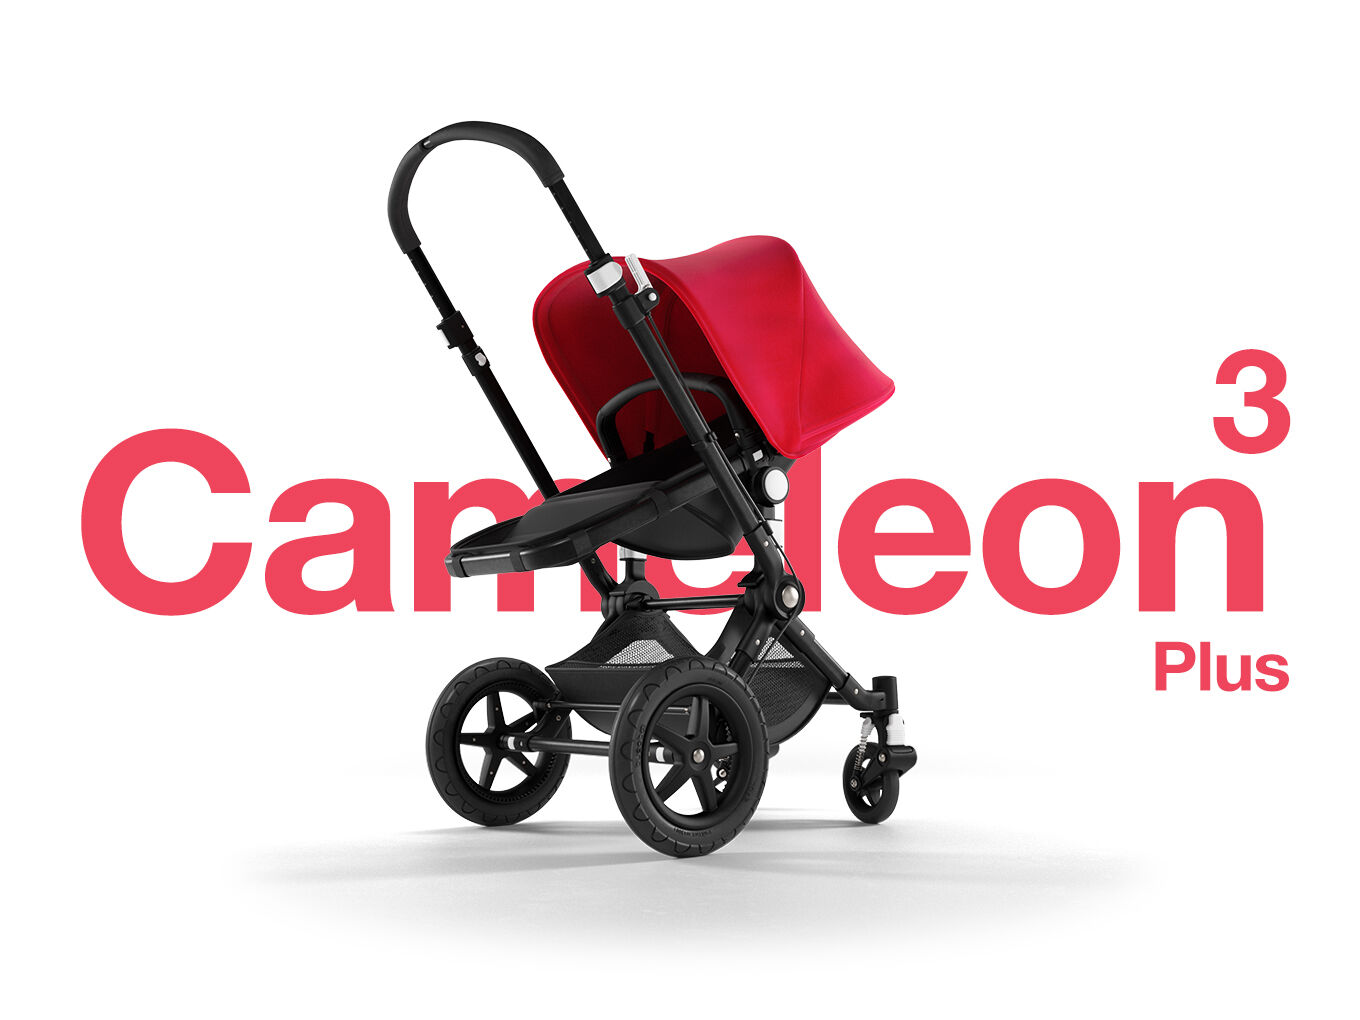 changing bugaboo cameleon bassinet to seat